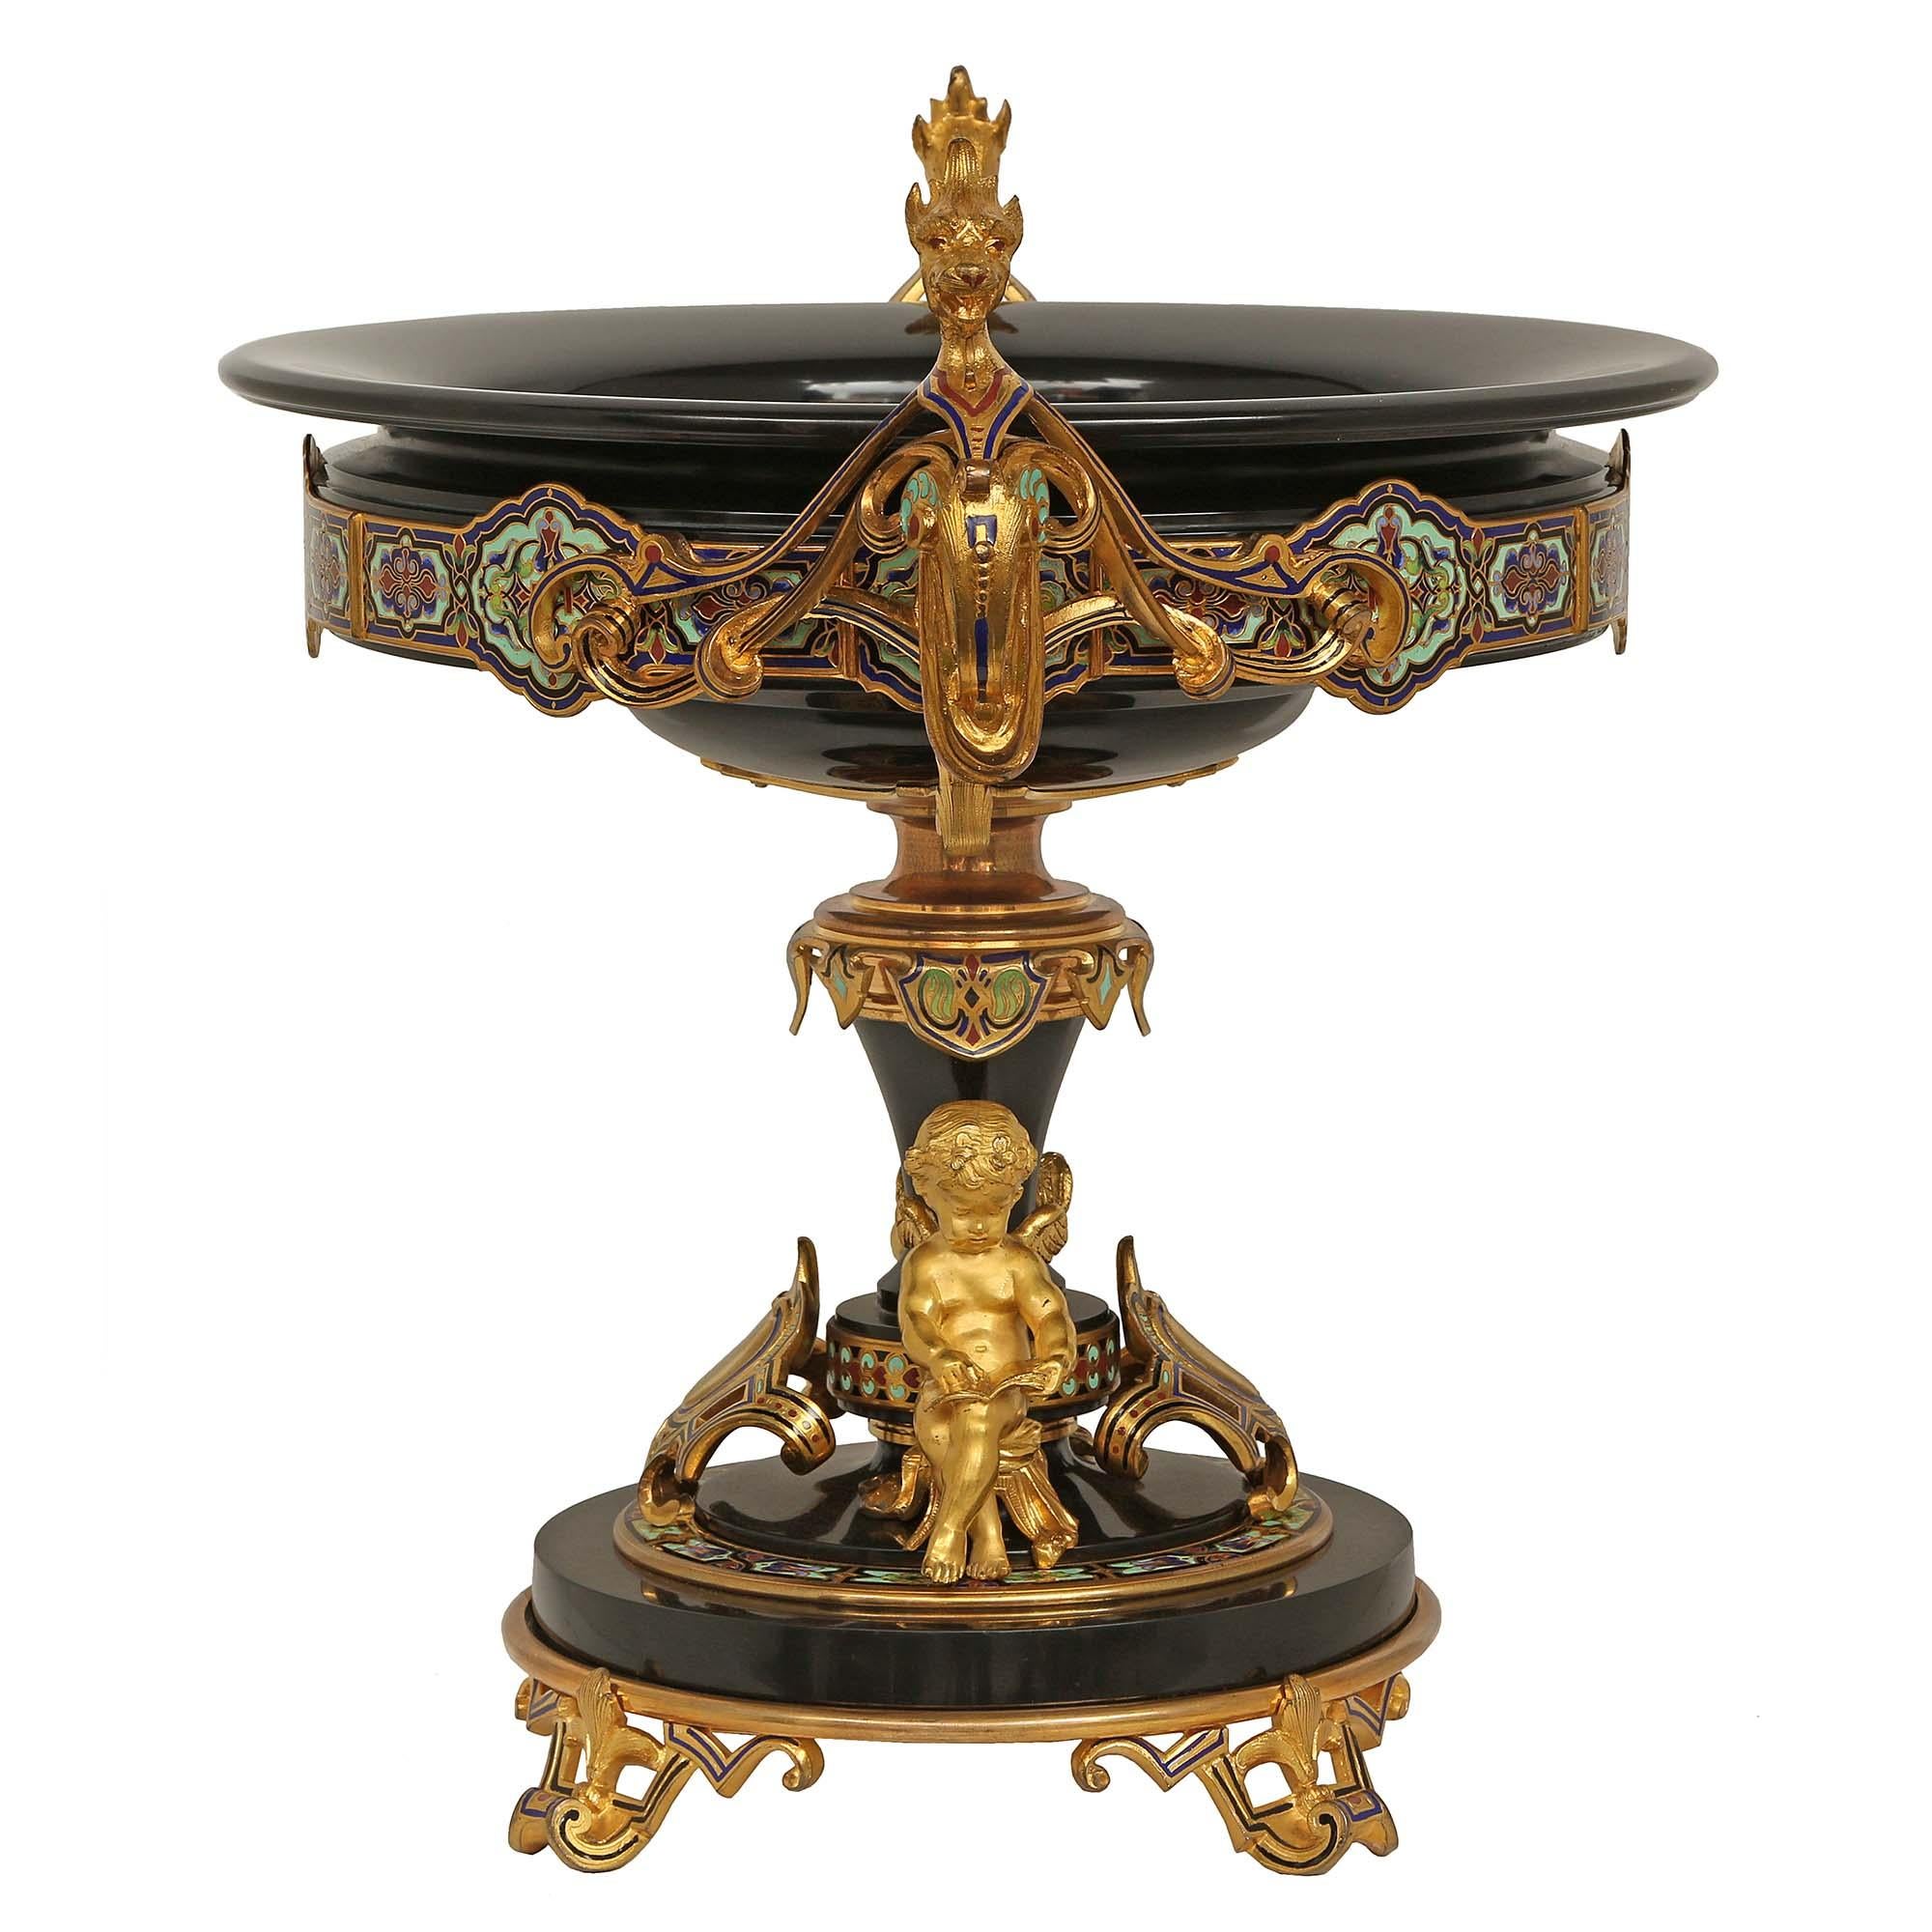 French 19th Century Belle Époque Period Marble, Ormolu and Cloisonné Centerpiece In Good Condition For Sale In West Palm Beach, FL